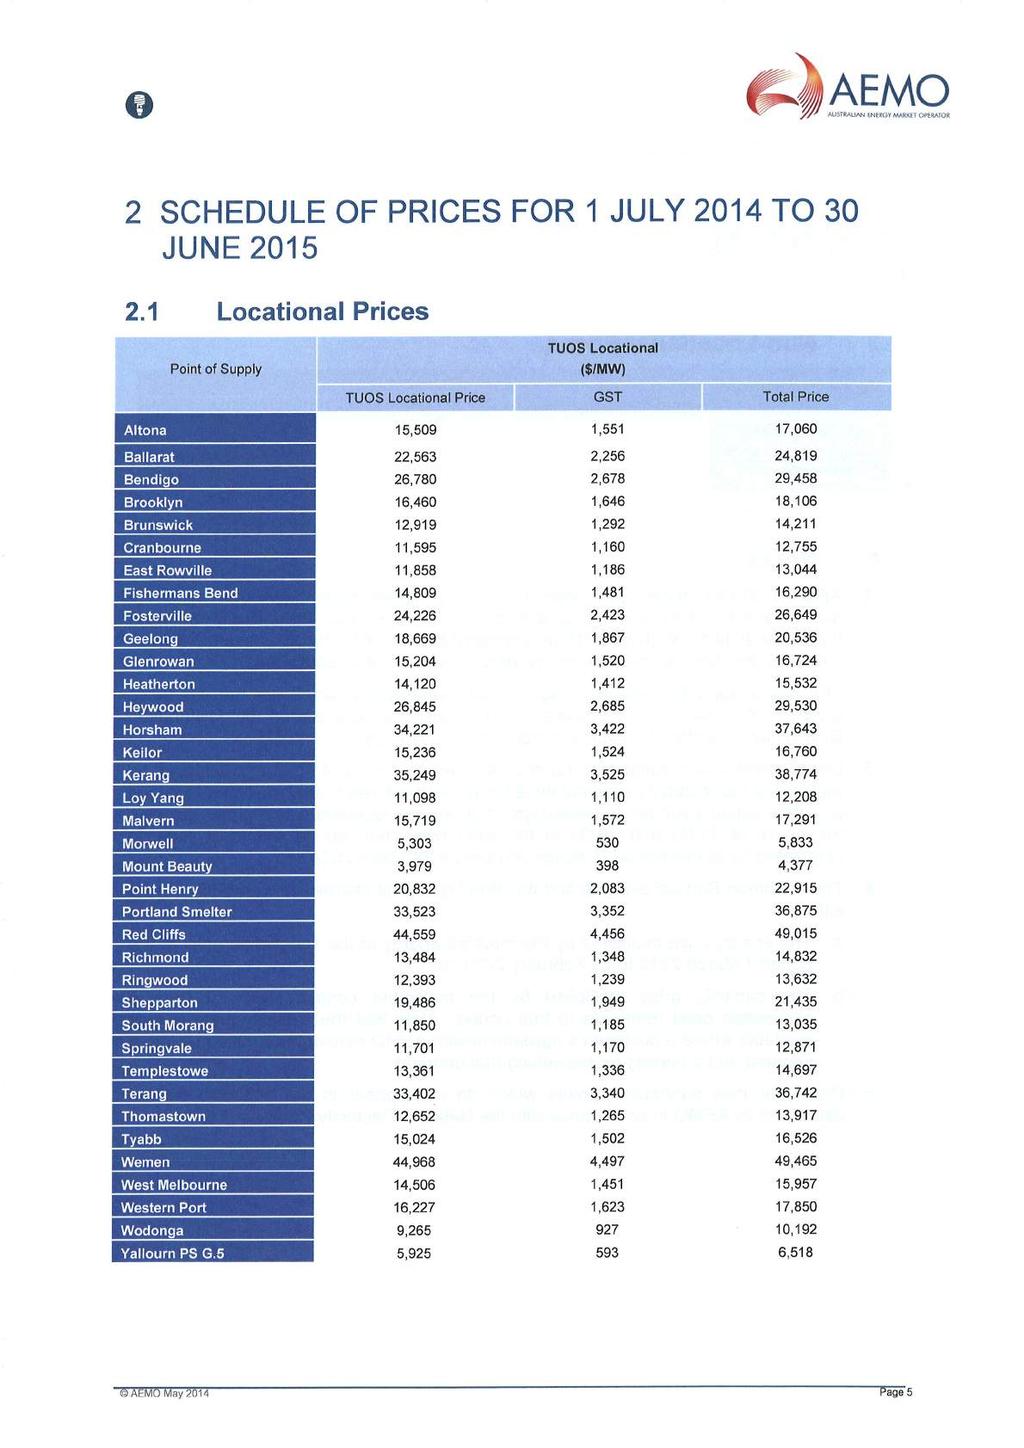 2 SCHEDULE OF PRICES FOR 1 JULY 2014 TO 30 JUNE 2015 2.